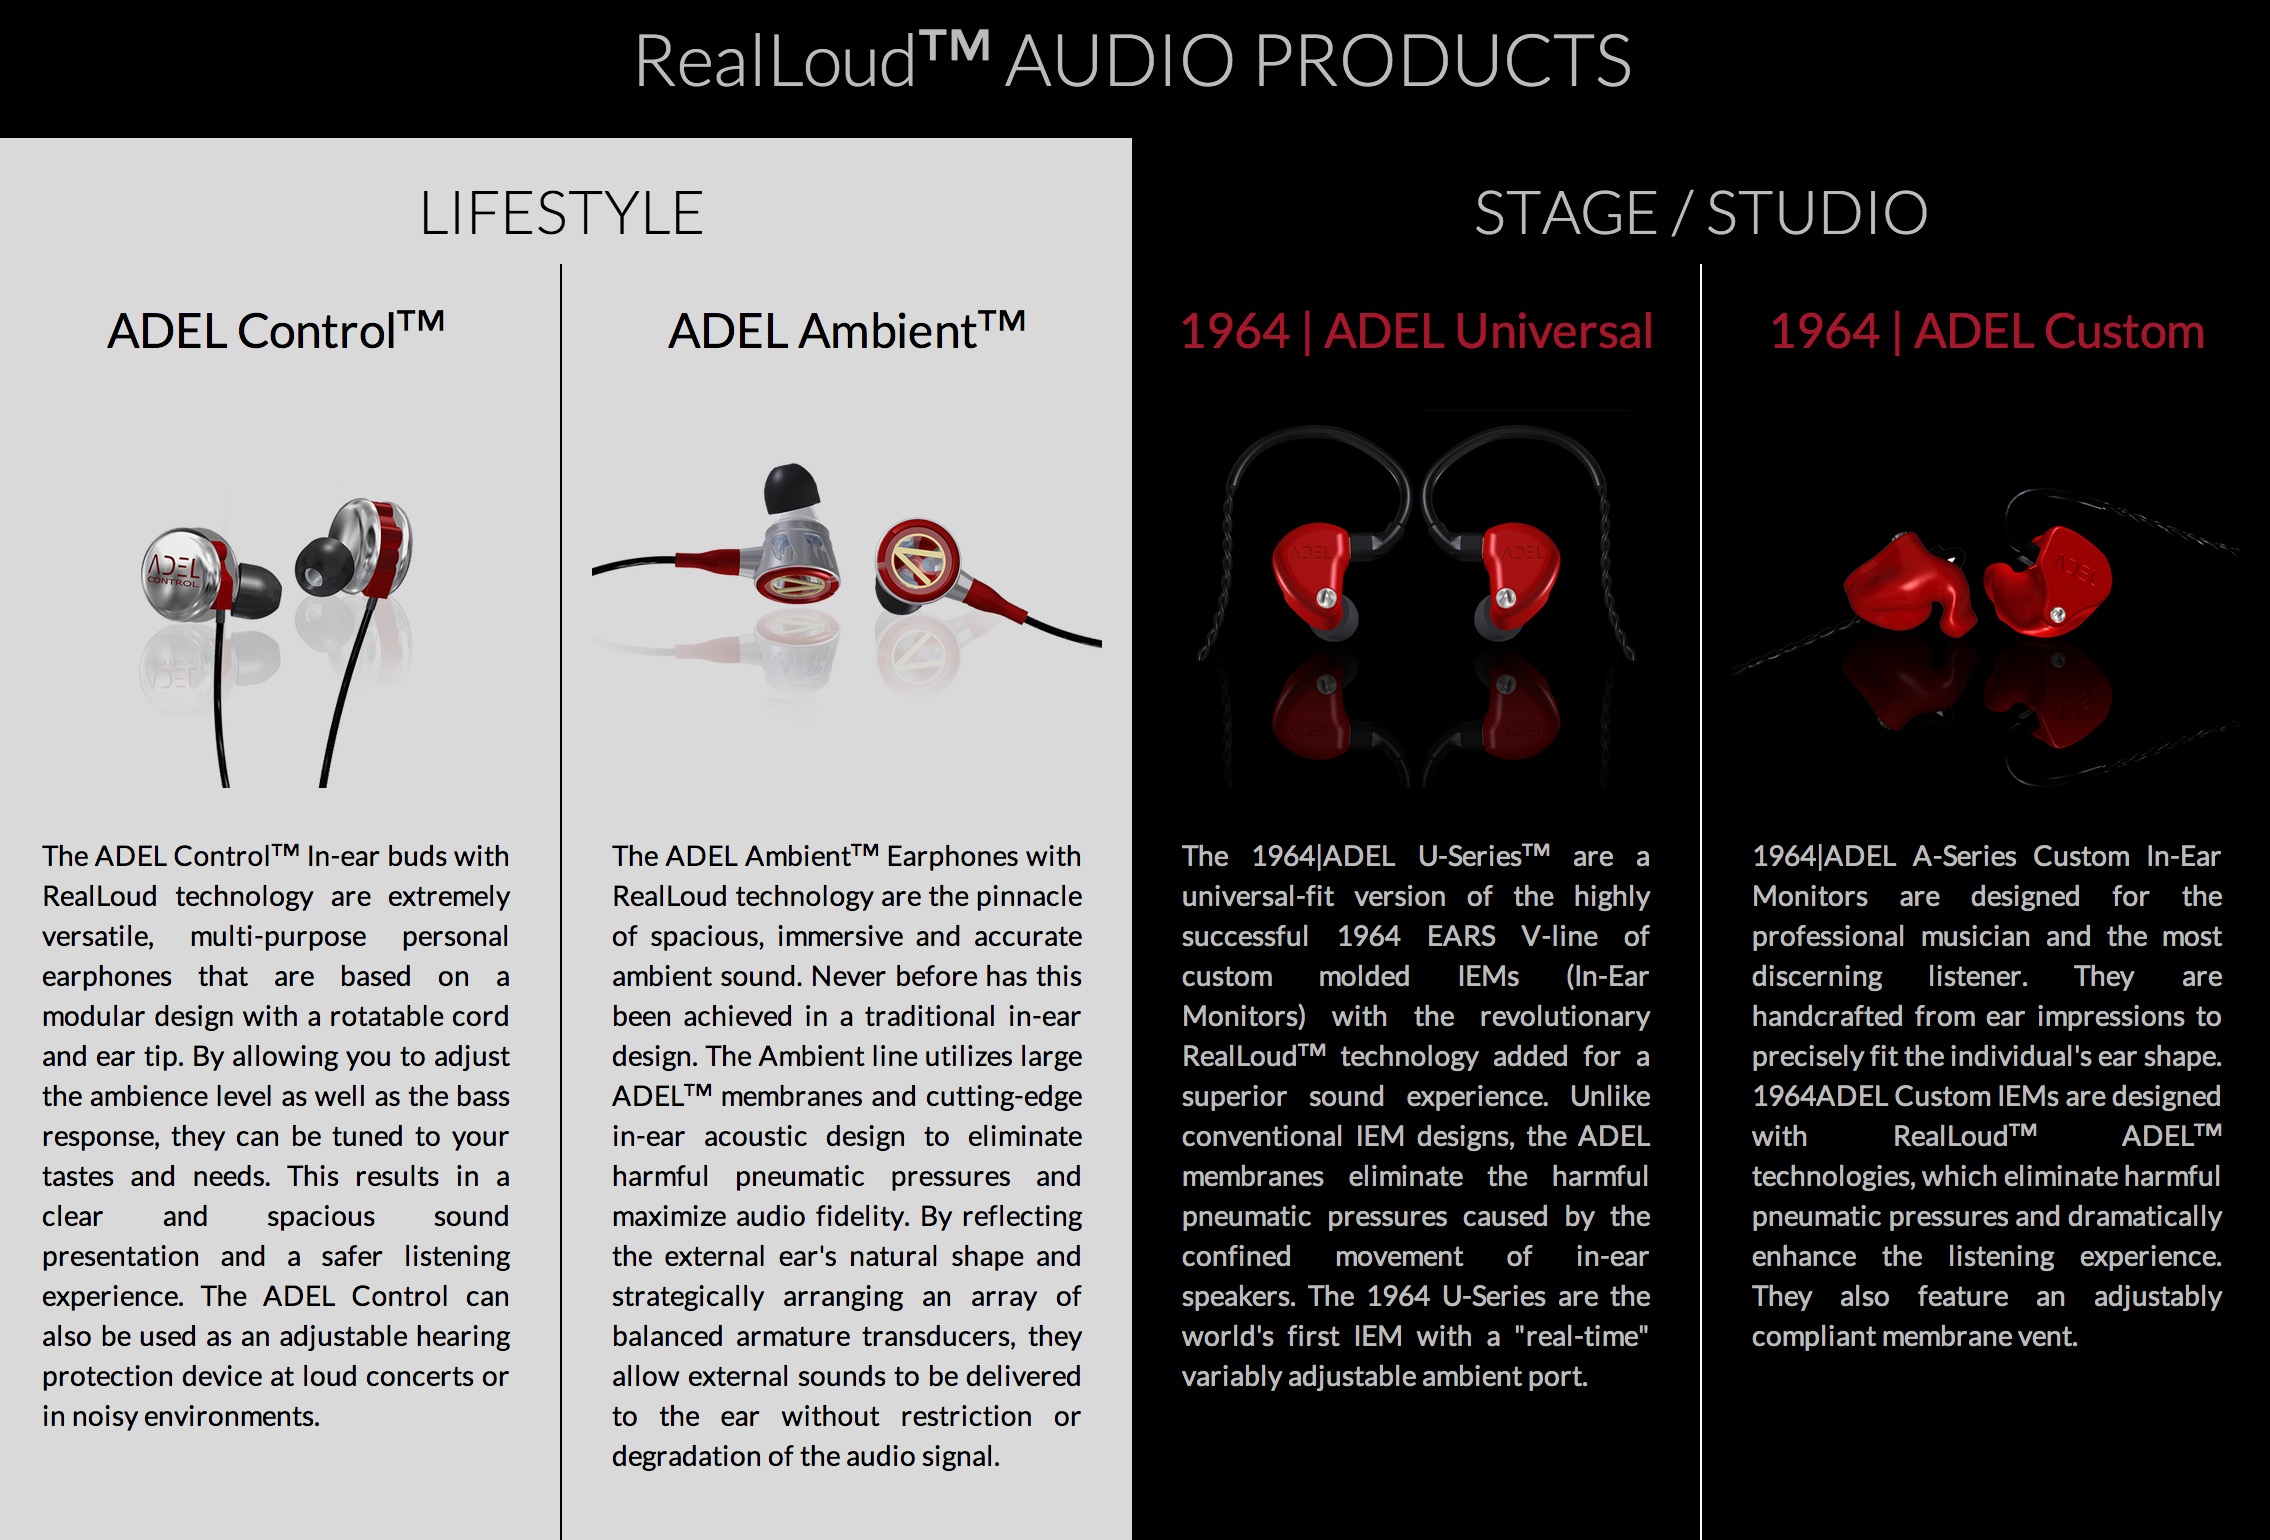 RealLoud-AUDIO-PRODUCTS